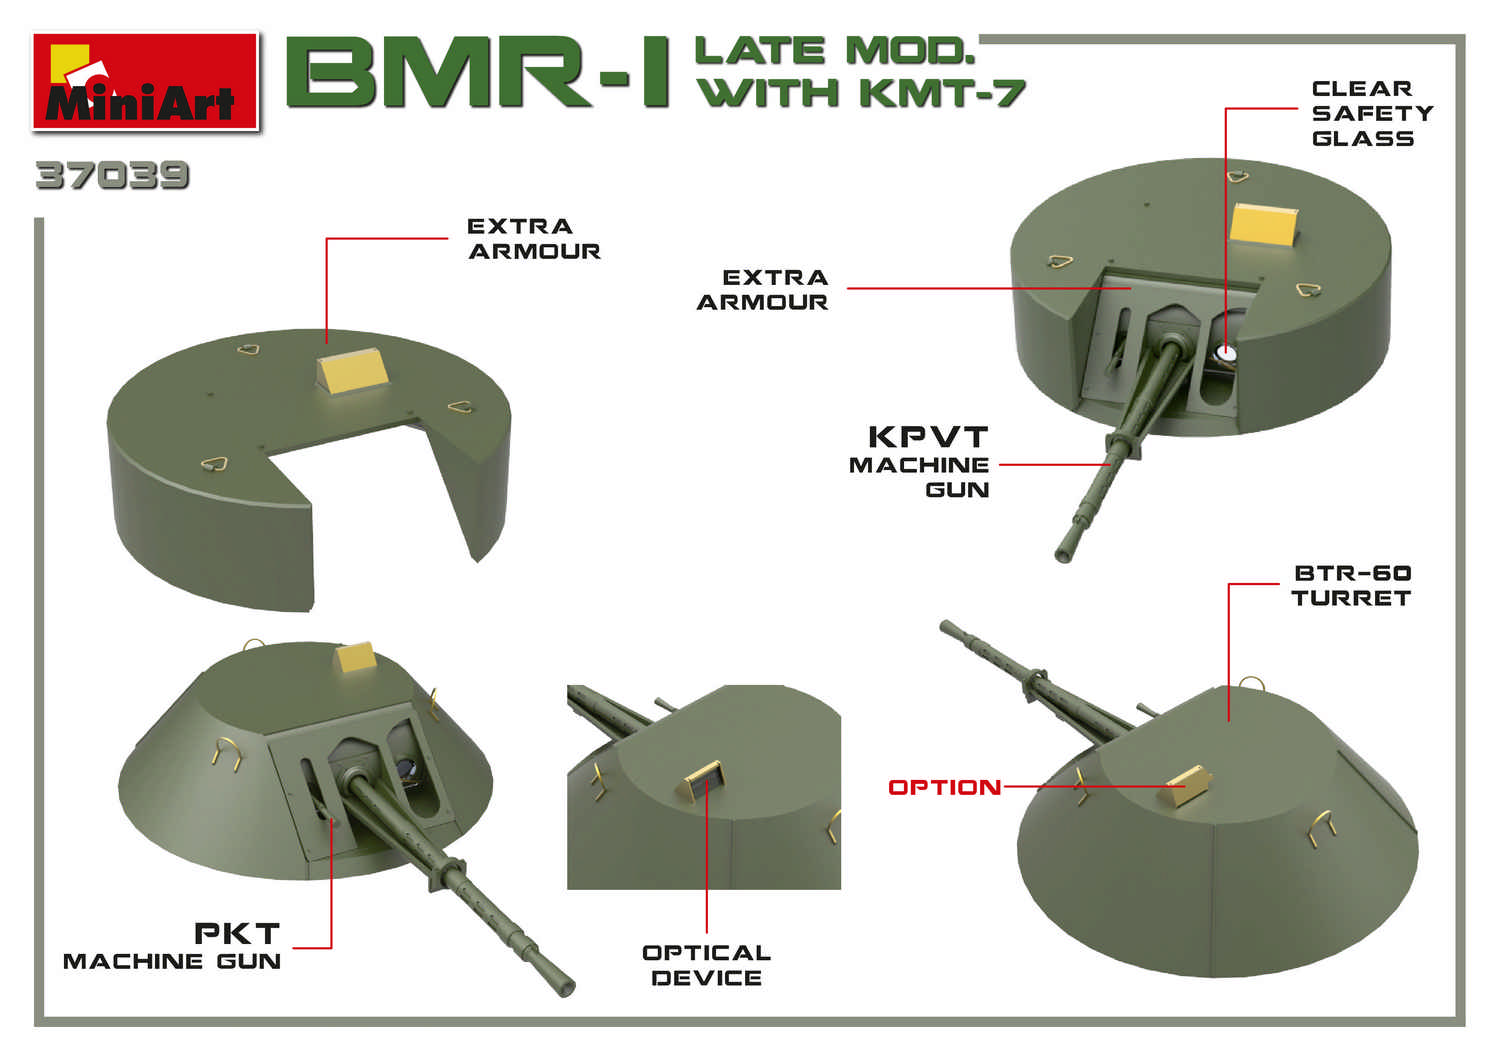 1/35 BMR-1 LATE MOD. WITH KMT-7 MiniArt 37039